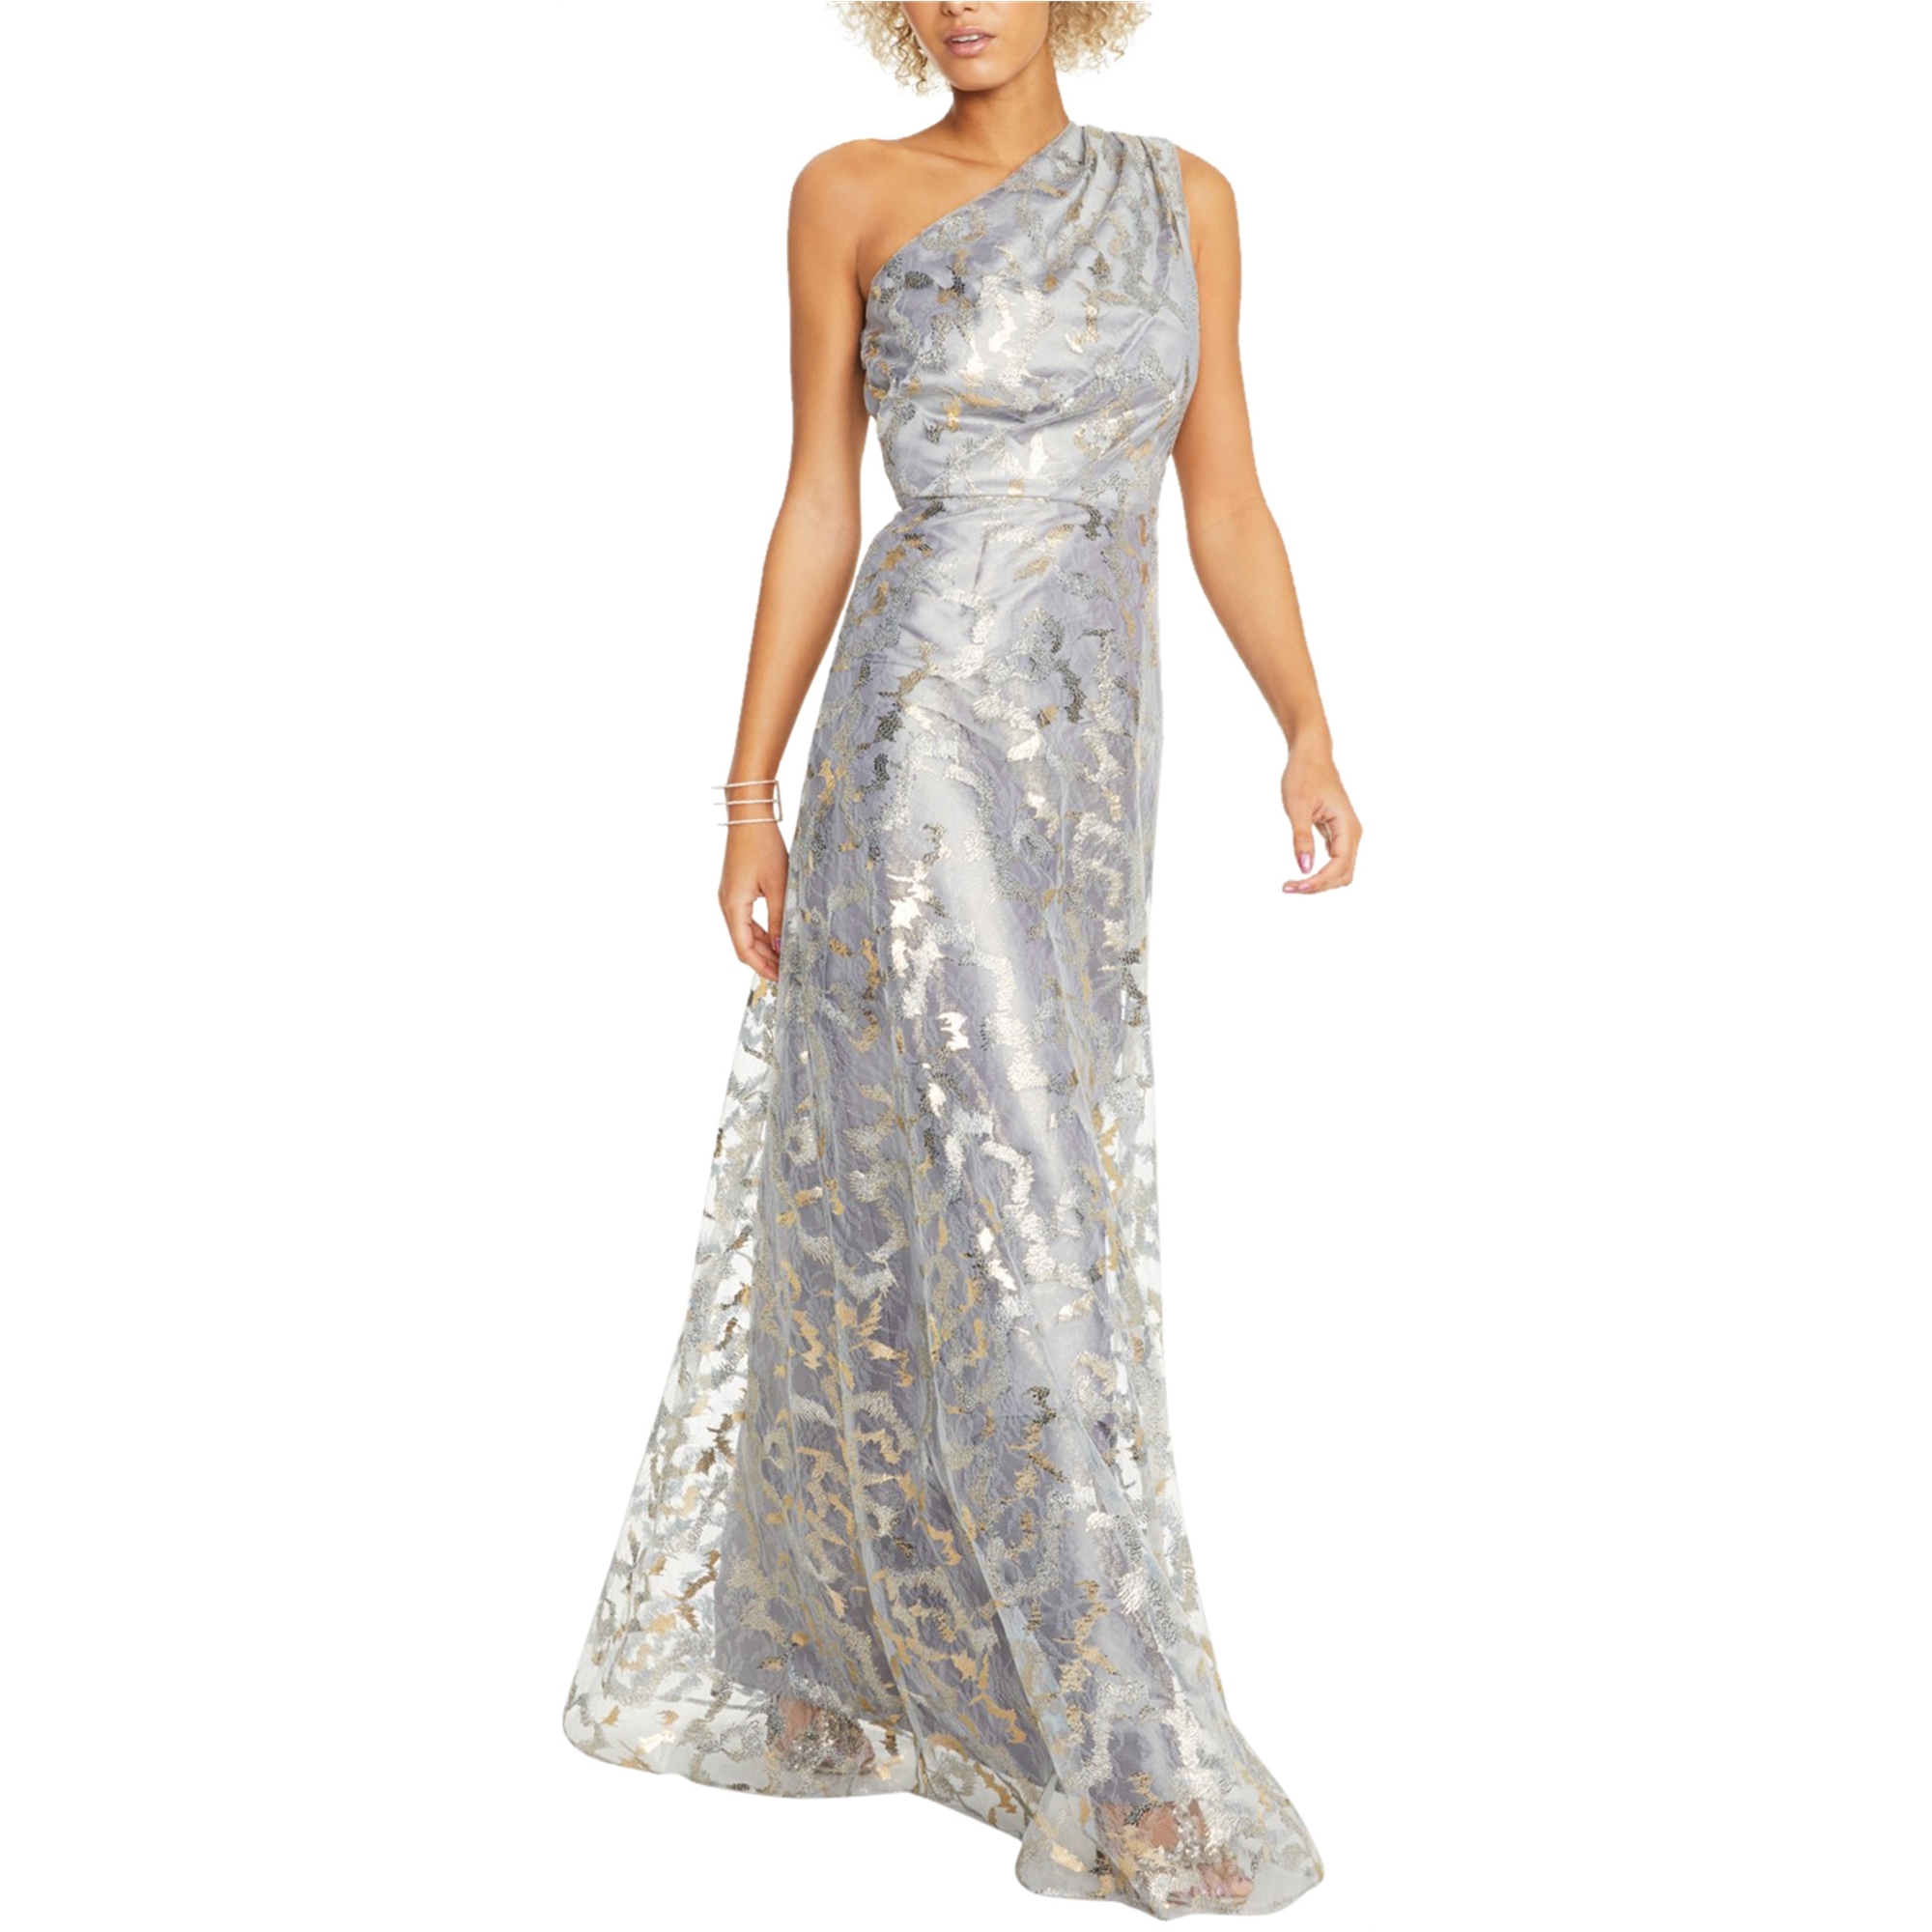 Buy a Womens Adrianna Shimmer Gown One Shoulder Online | TagsWeekly.com